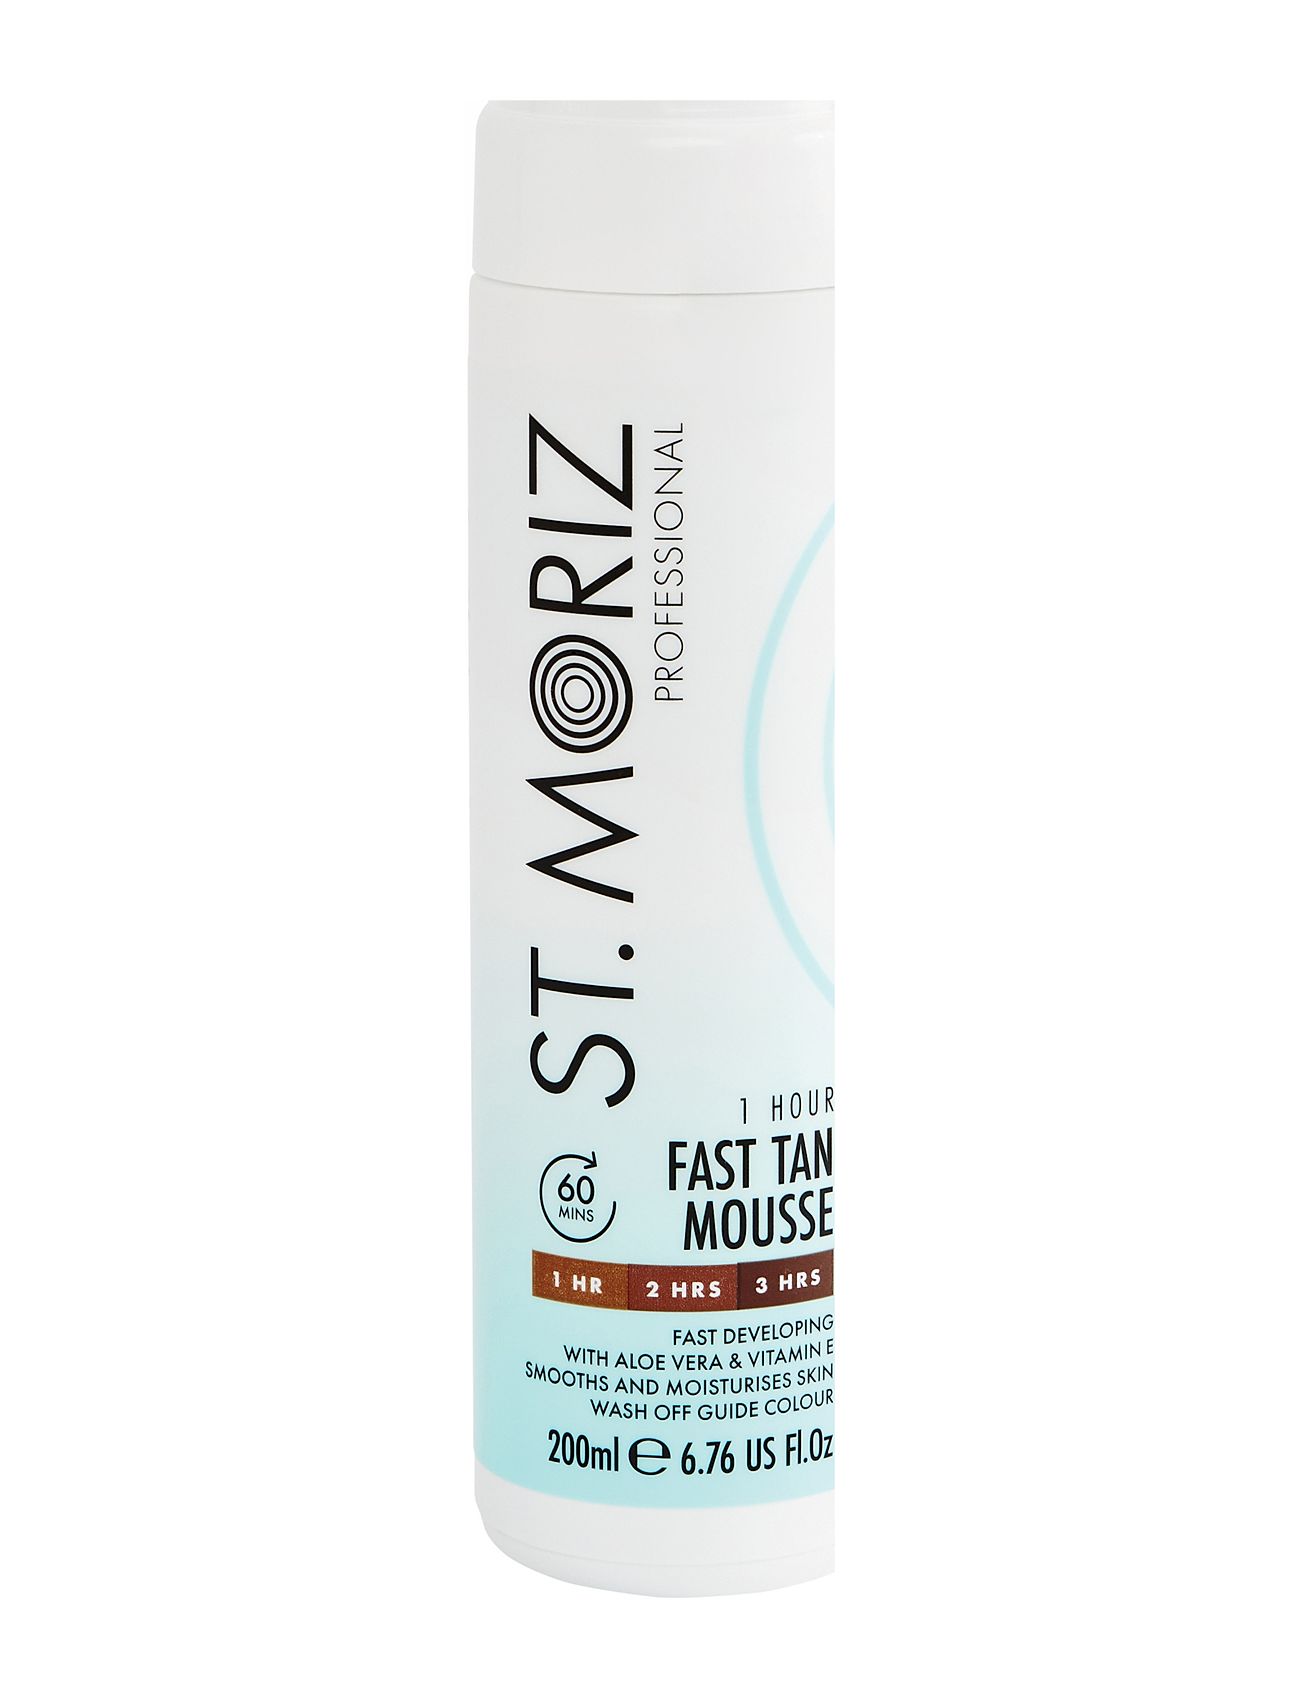 Pro 1 Hour Fast Tan Mousse 200 Ml Beauty Women Skin Care Sun Products Self Tanners Mousse Nude St. Moriz